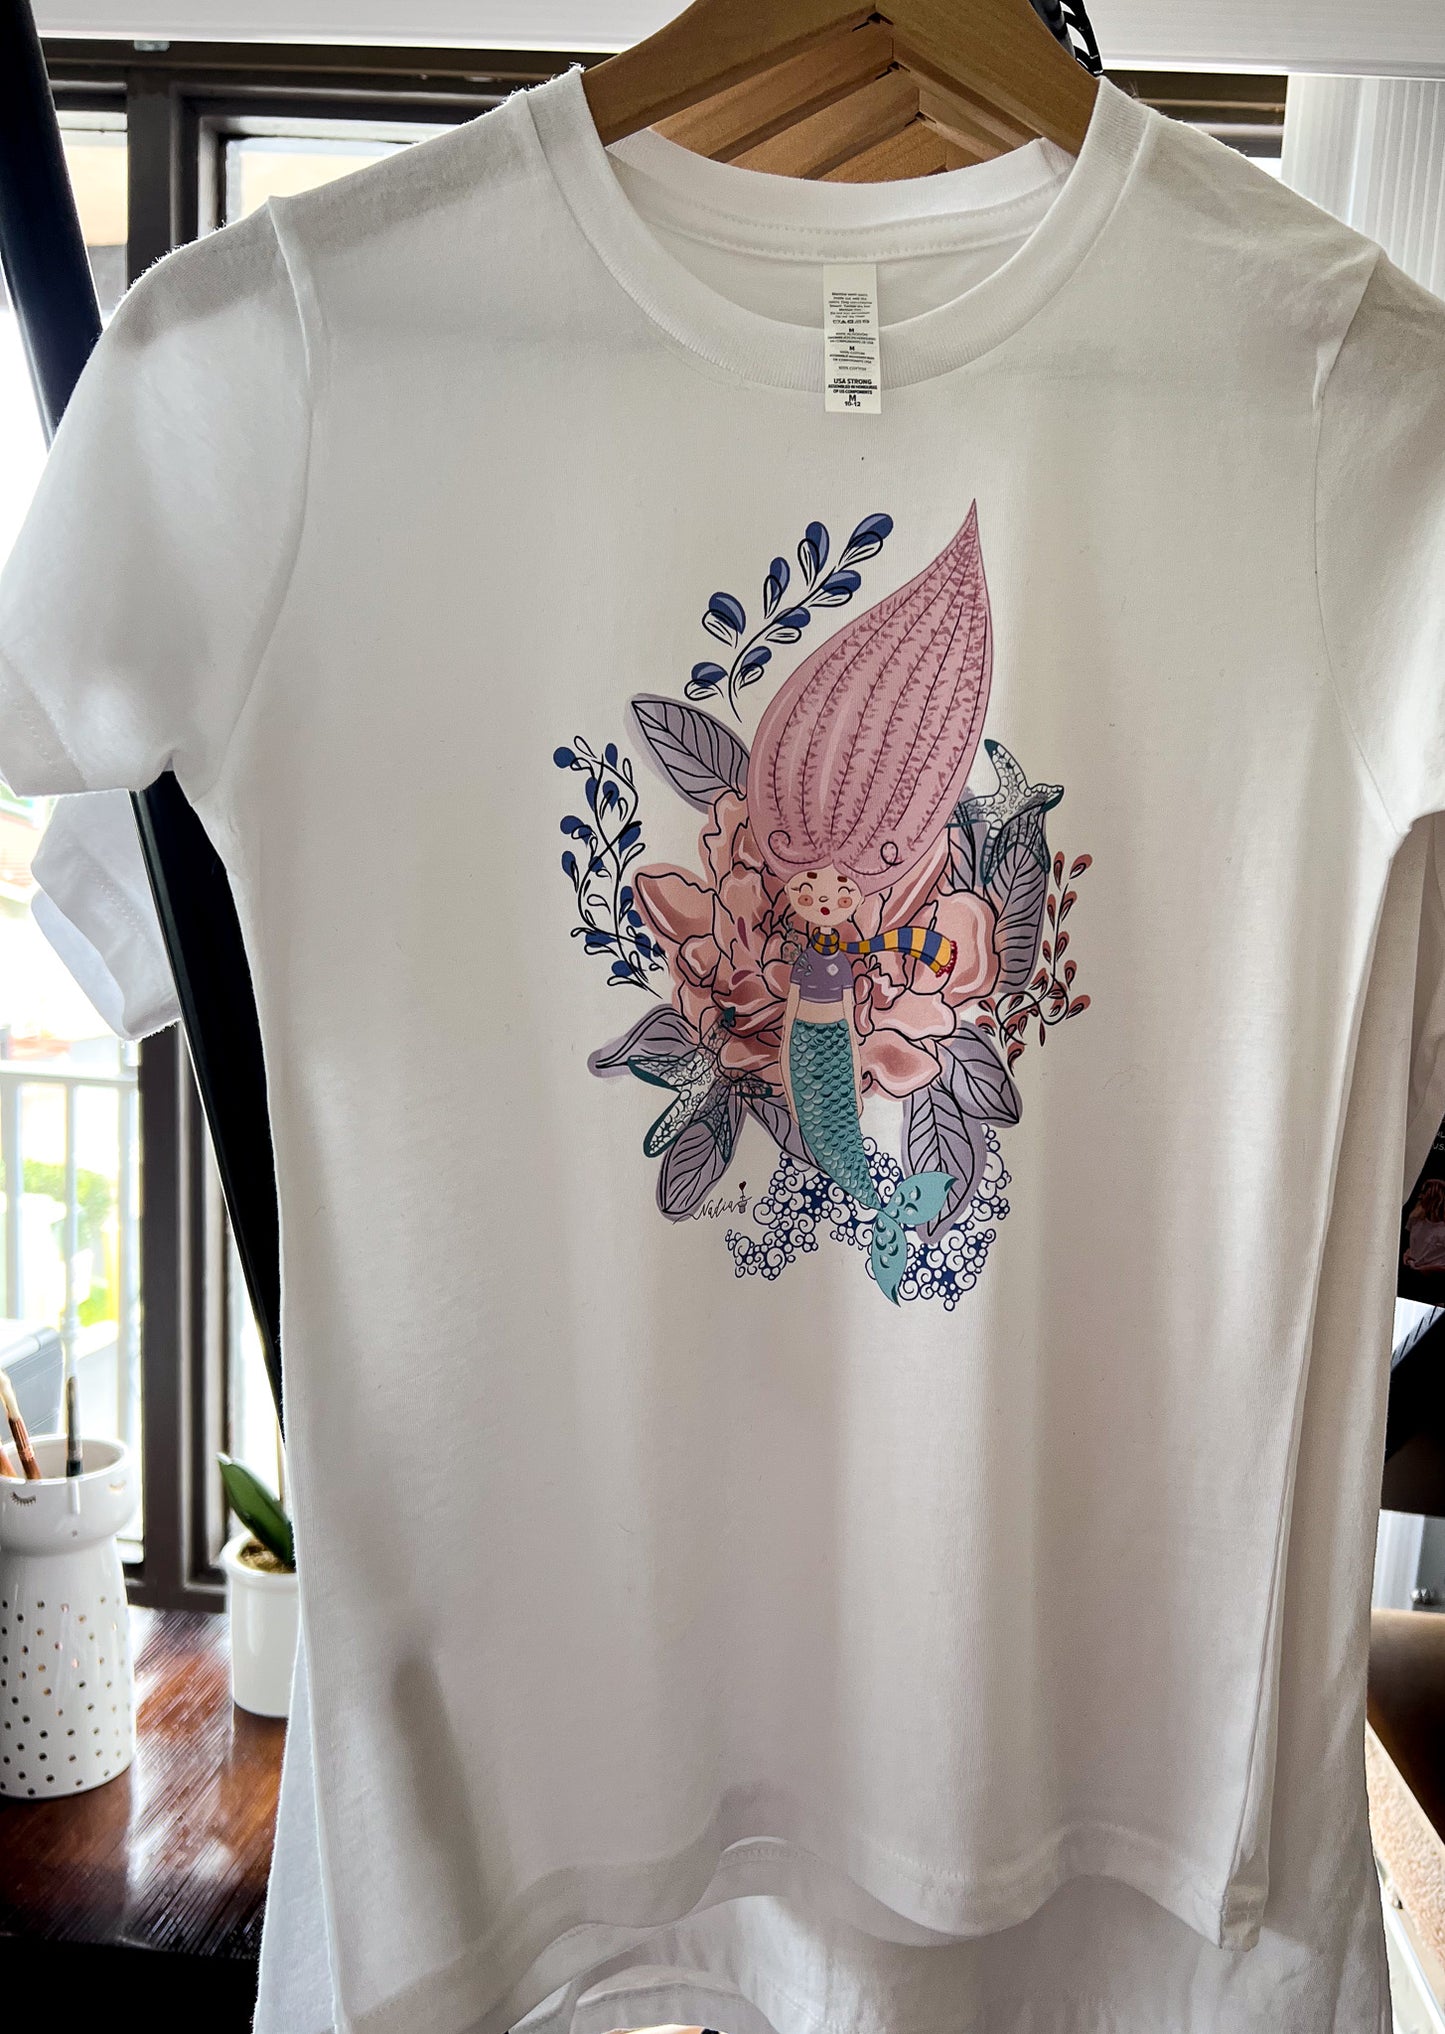 Floral Mermaid graphic tee collection by North Shore Girls. Mermaid illustrated t-shirt for girls